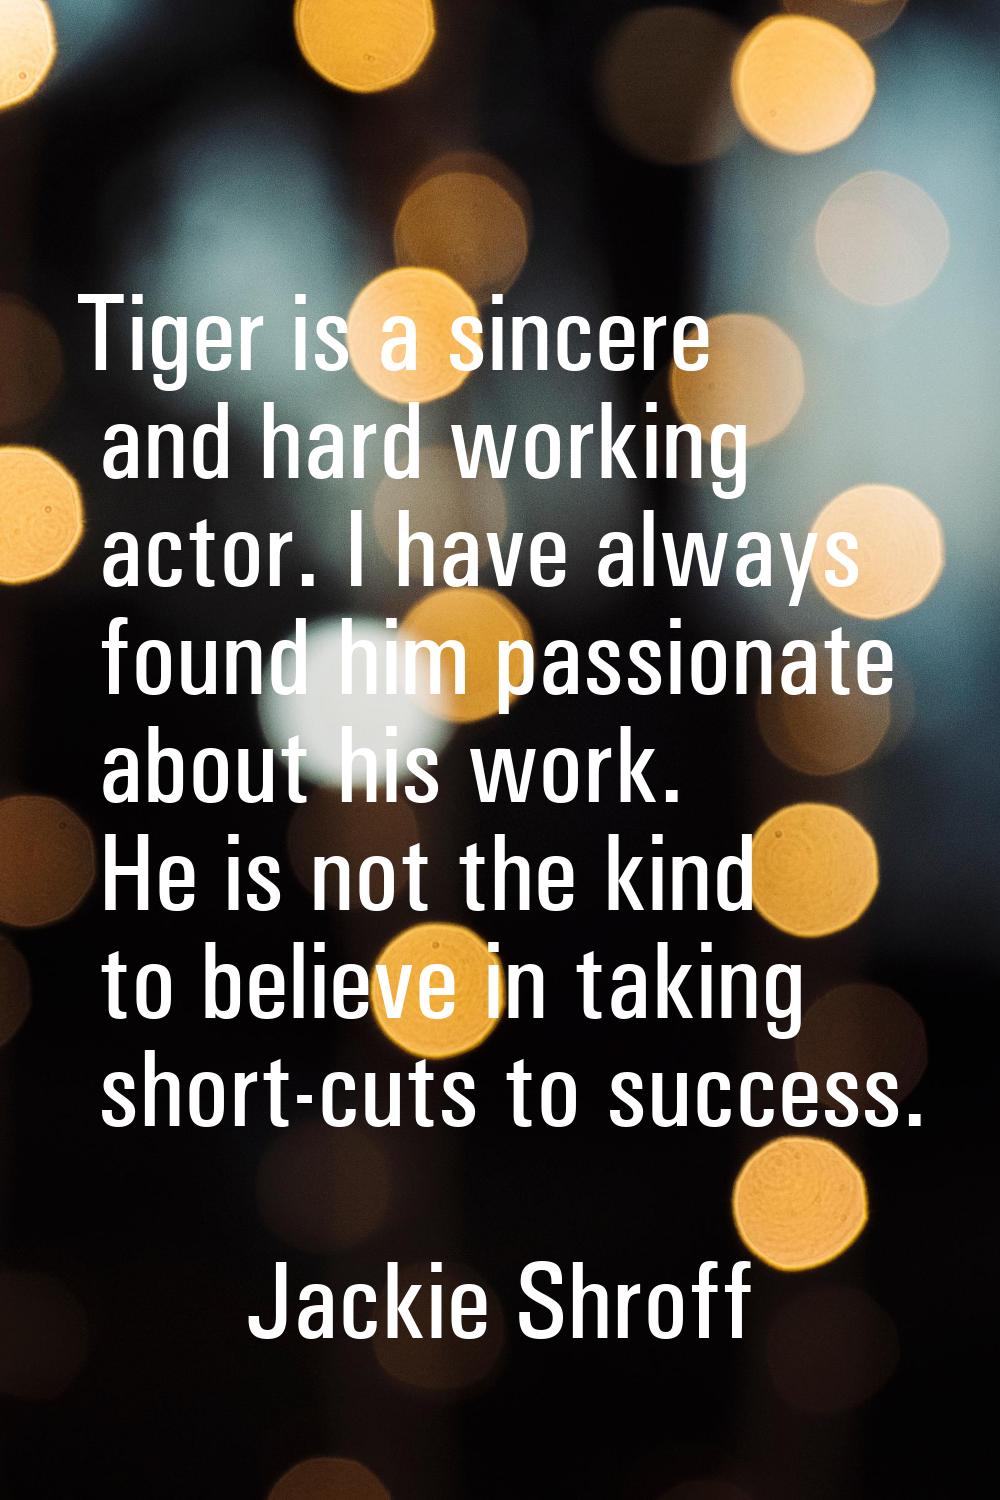 Tiger is a sincere and hard working actor. I have always found him passionate about his work. He is